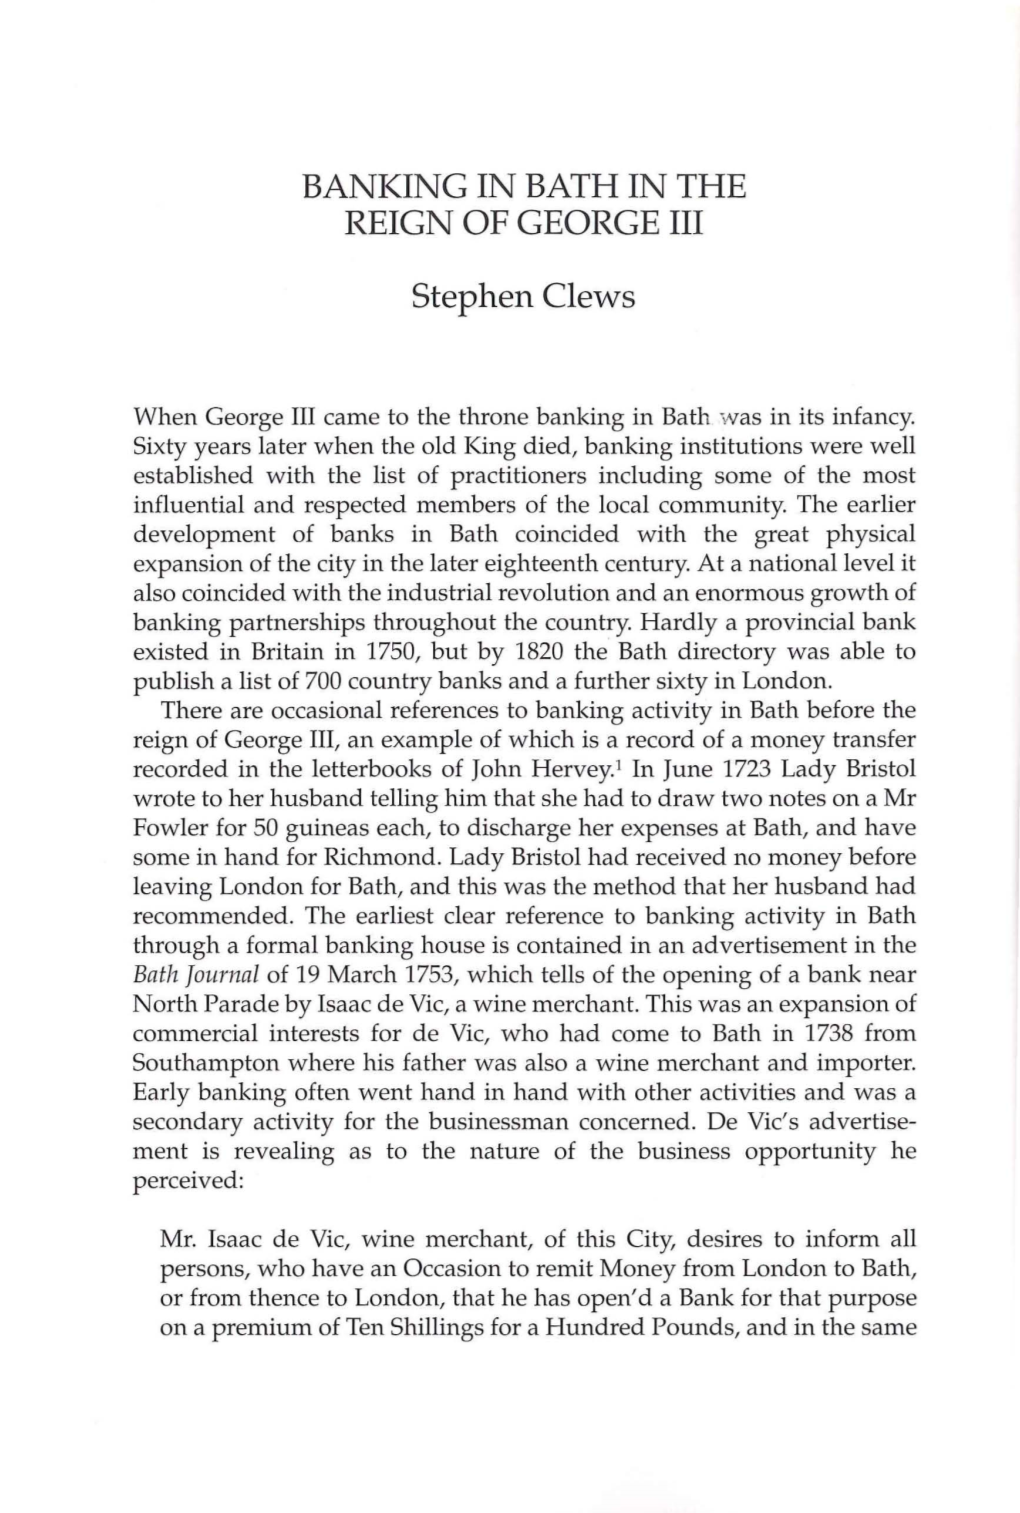 BANKING in BATH in the REIGN of GEORGE III Stephen Clews